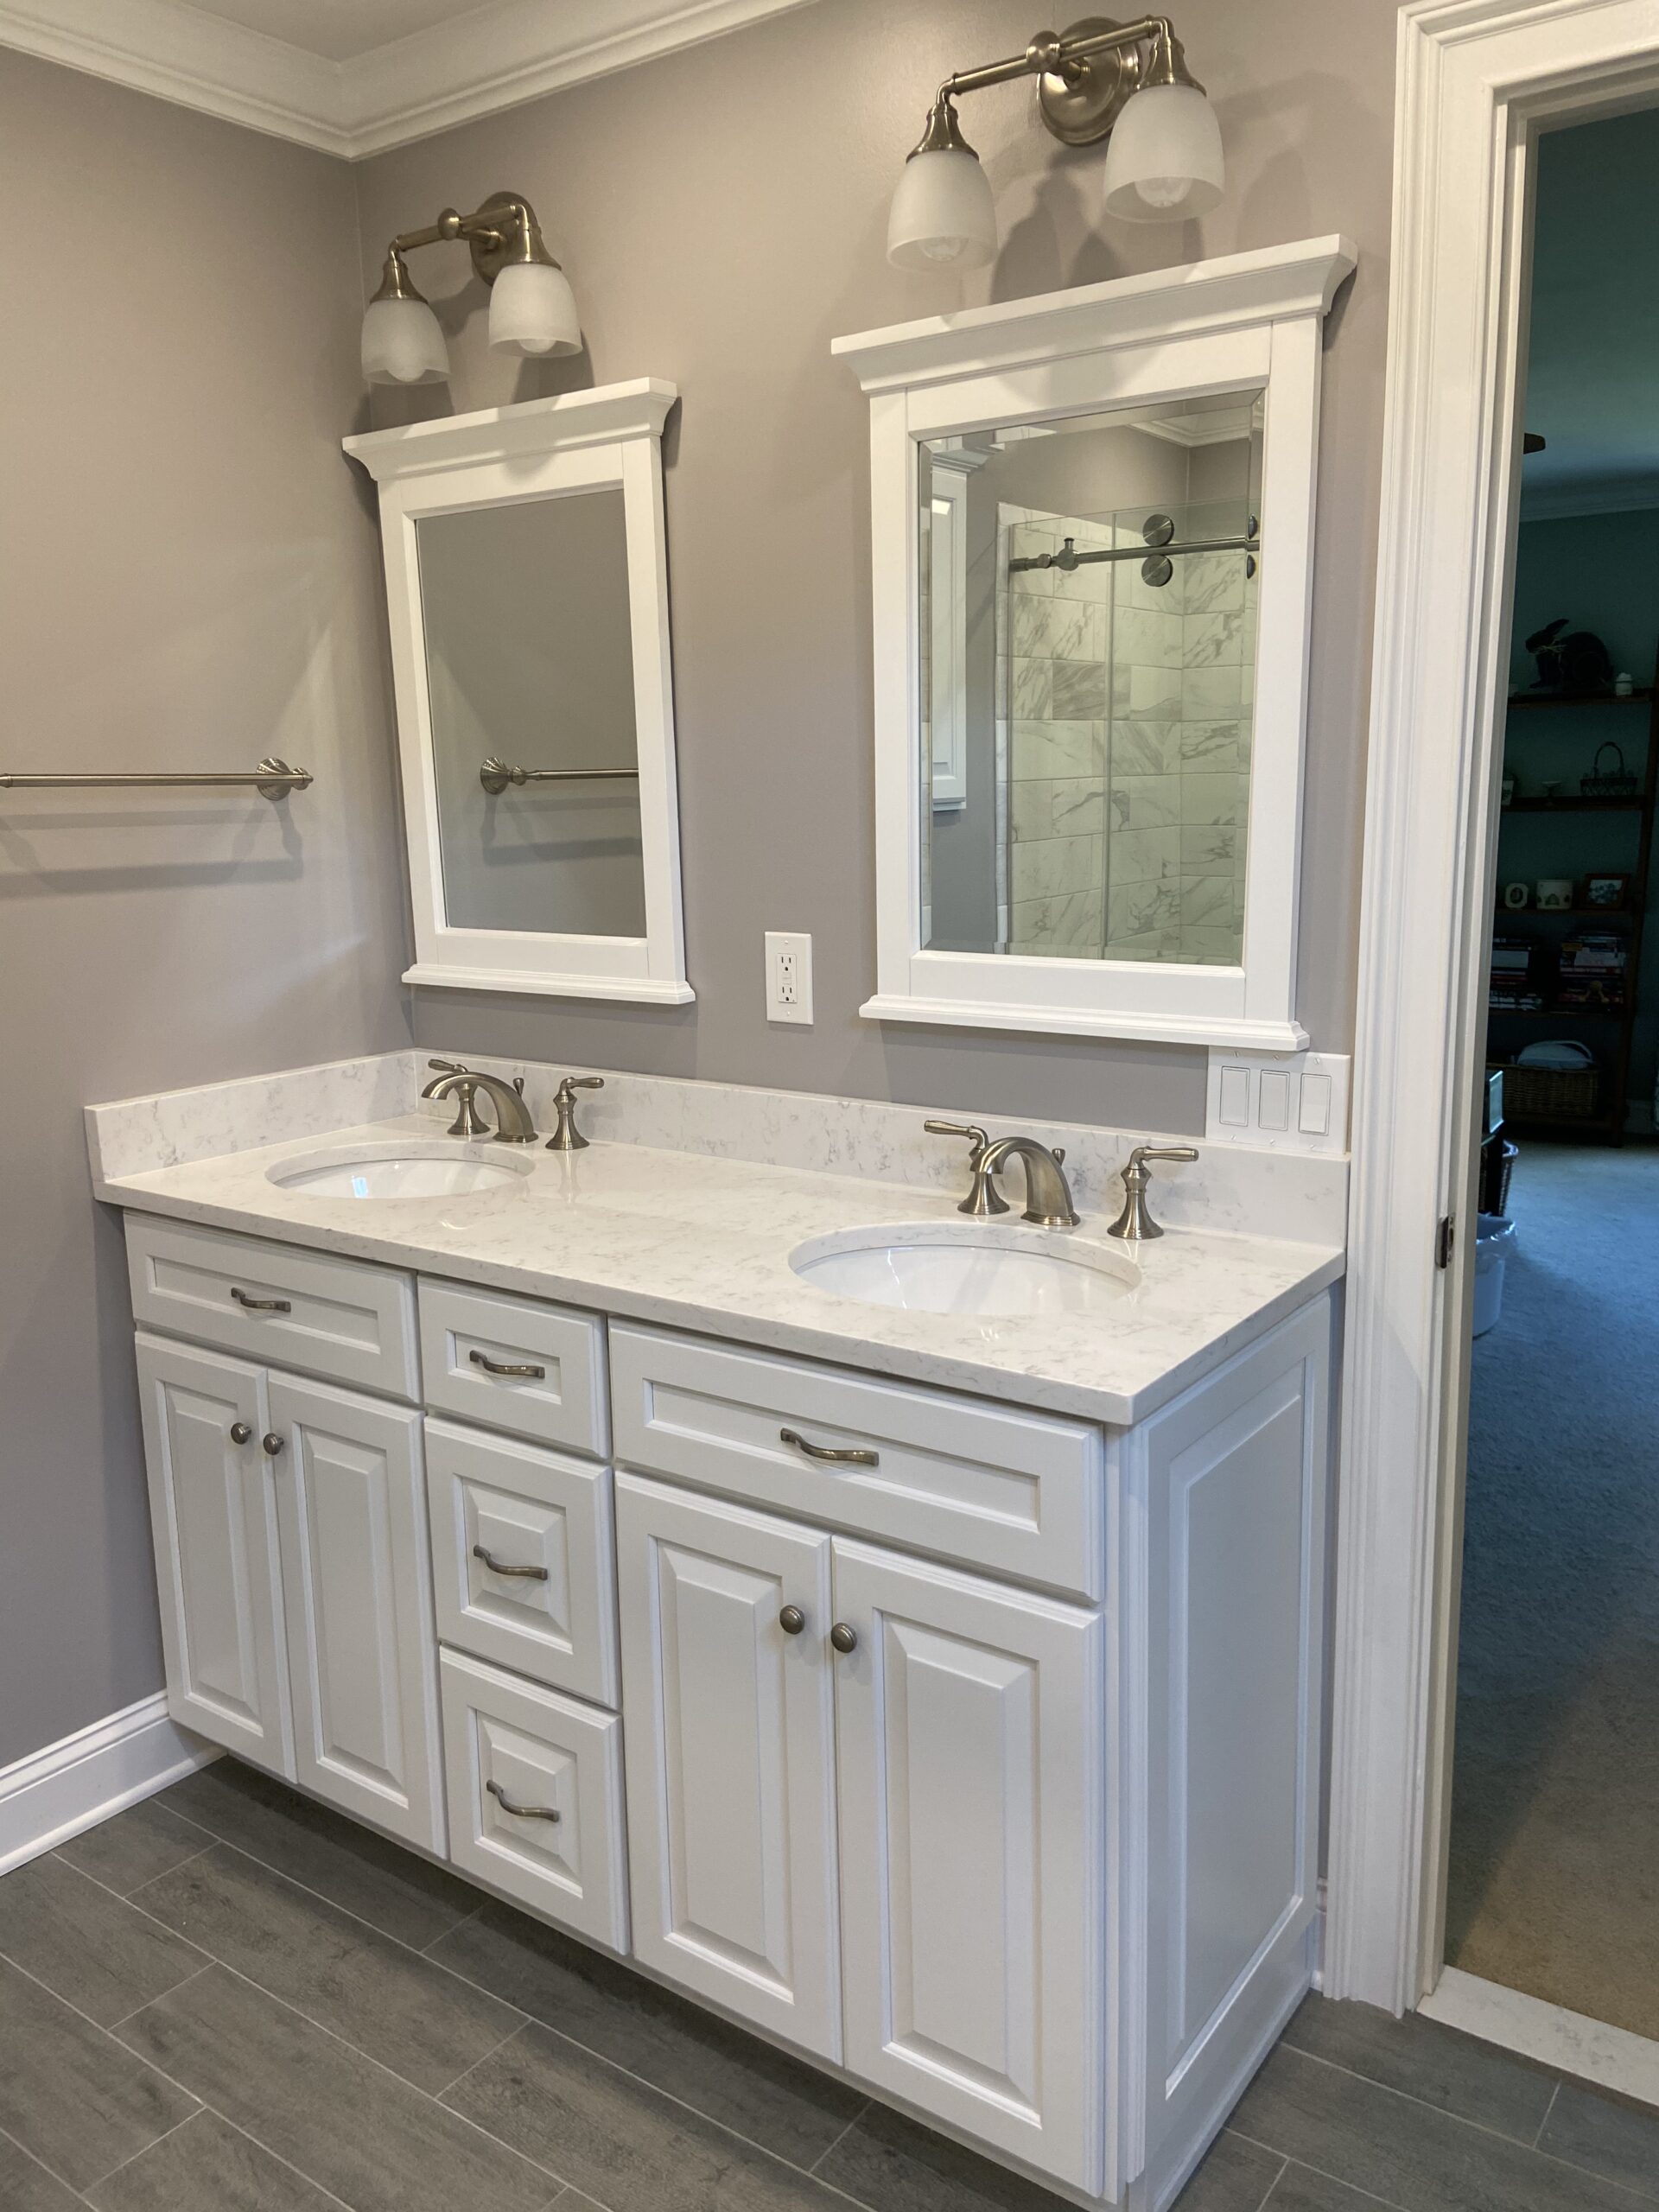 Custom Millwork & Cabinets ⋆ KC Quality Contracting